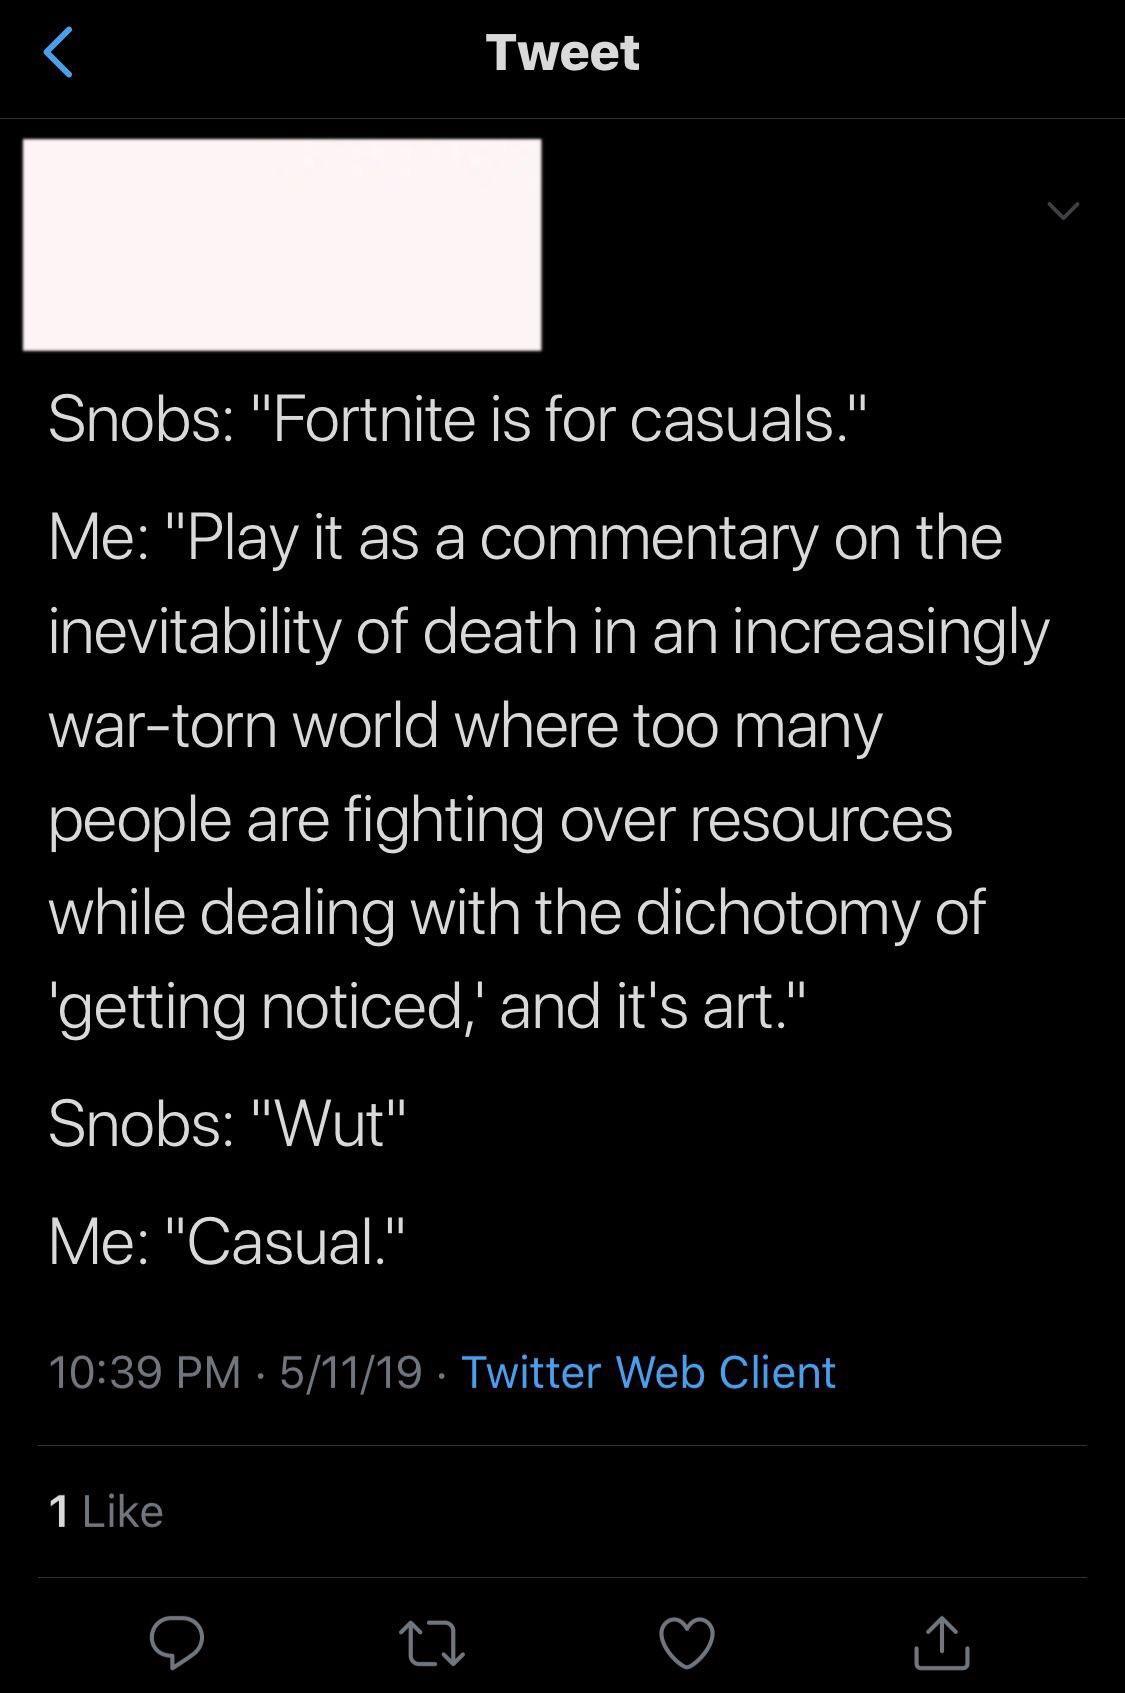 fortnite vs minecraft twitter - Tweet Snobs "Fortnite is for casuals." Me "Play it as a commentary on the inevitability of death in an increasingly wartorn world where too many people are fighting over resources while dealing with the dichotomy of "gettin